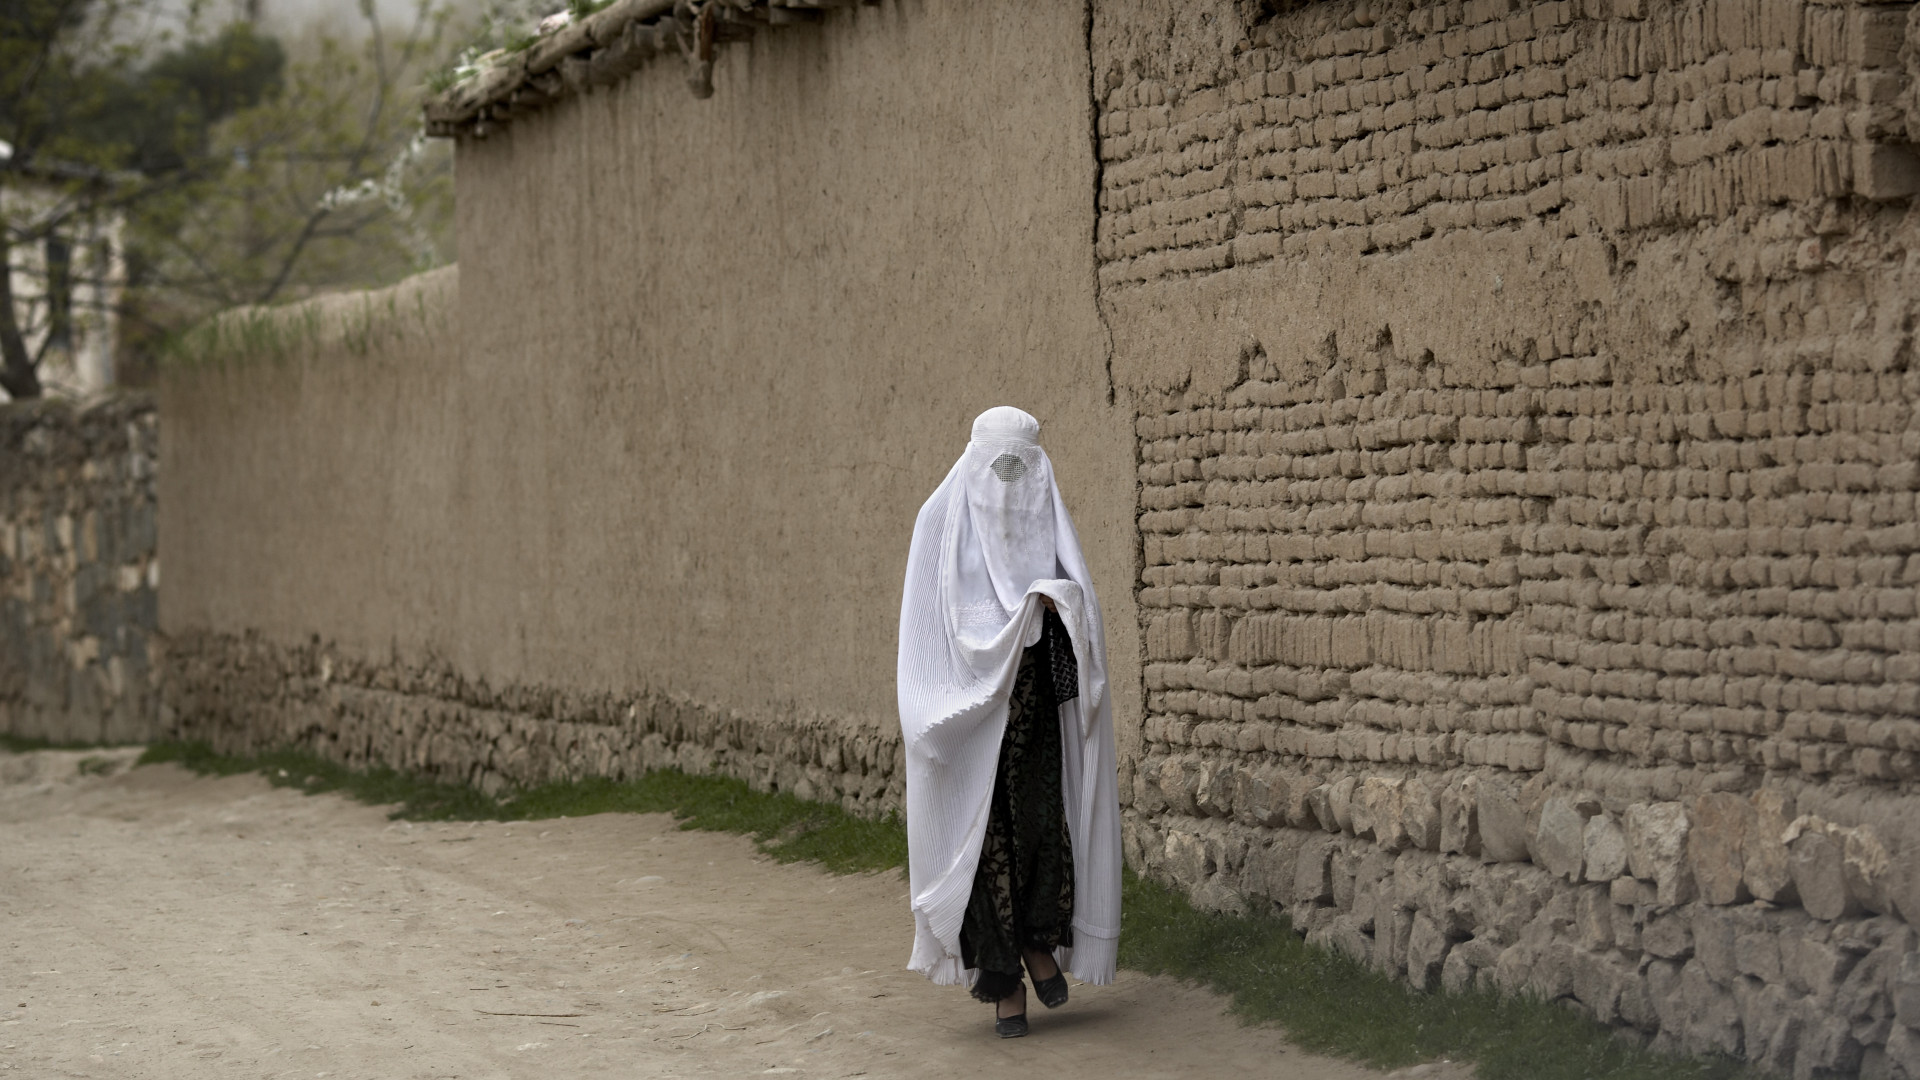 The Taliban leadership demanded that Afghan women stay at home